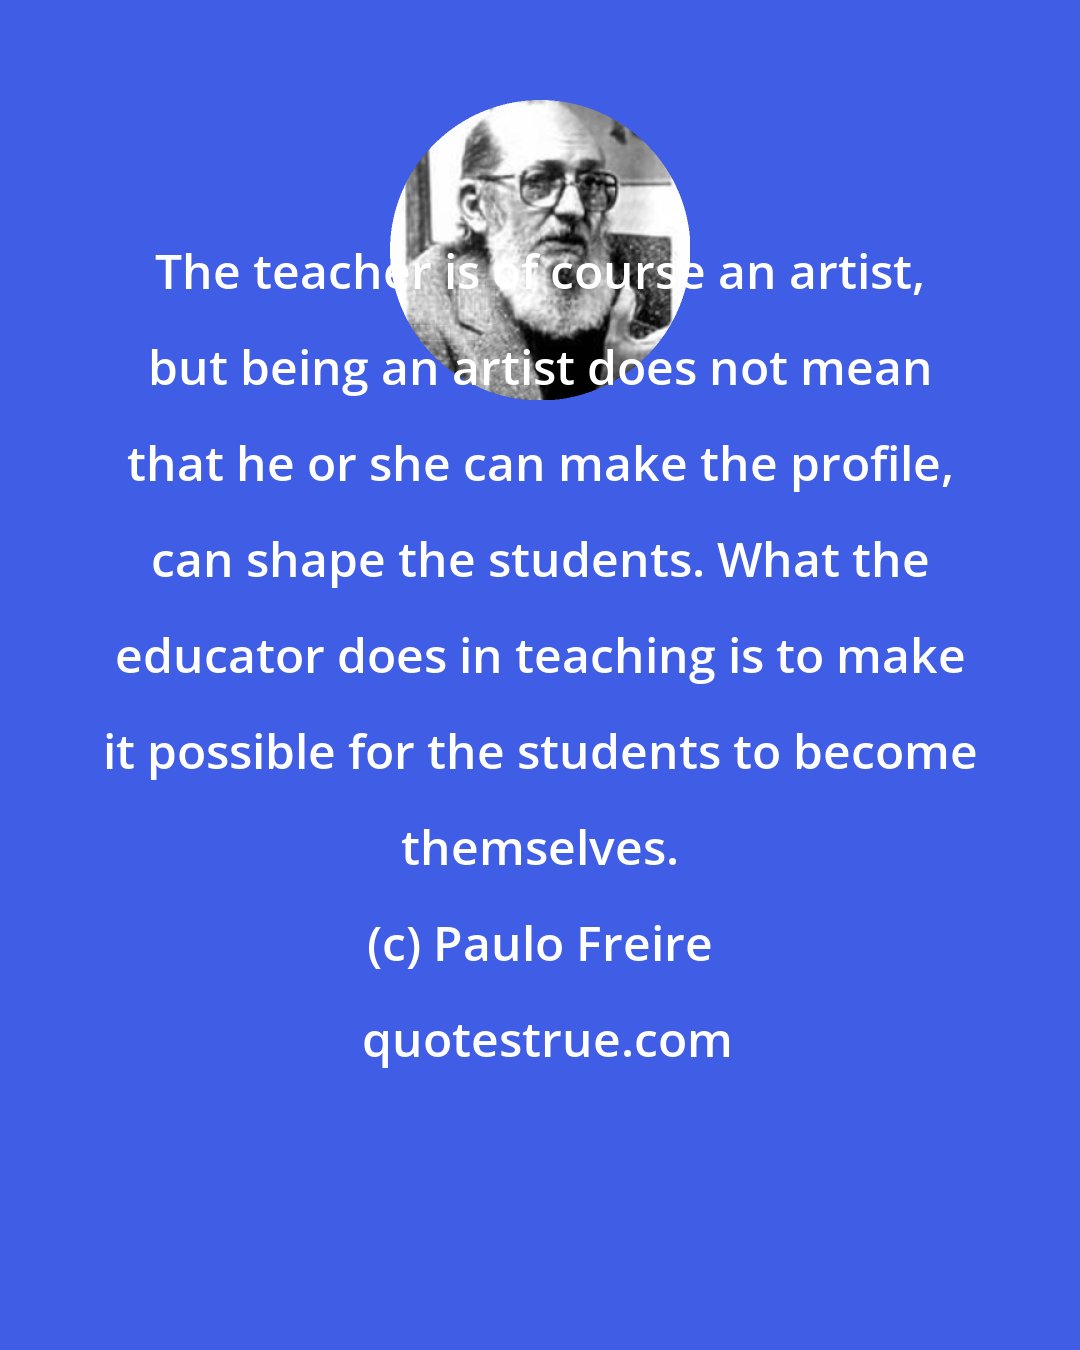 Paulo Freire: The teacher is of course an artist, but being an artist does not mean that he or she can make the profile, can shape the students. What the educator does in teaching is to make it possible for the students to become themselves.